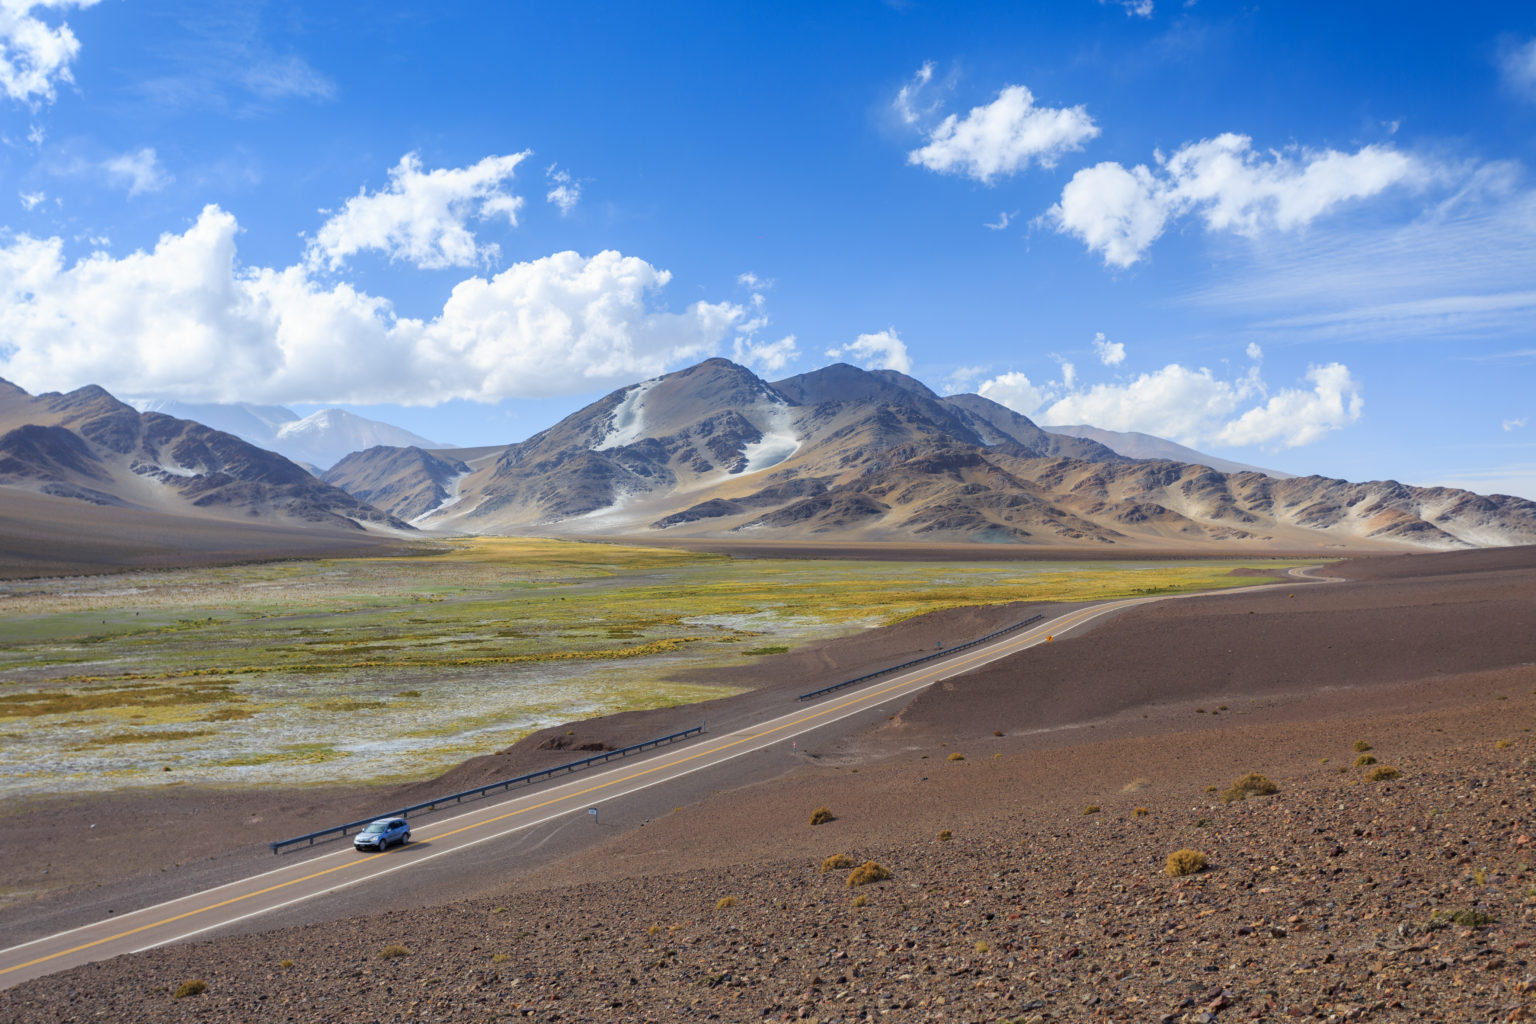 Zijin in talks with Argentina to turn lithium into battery cathode